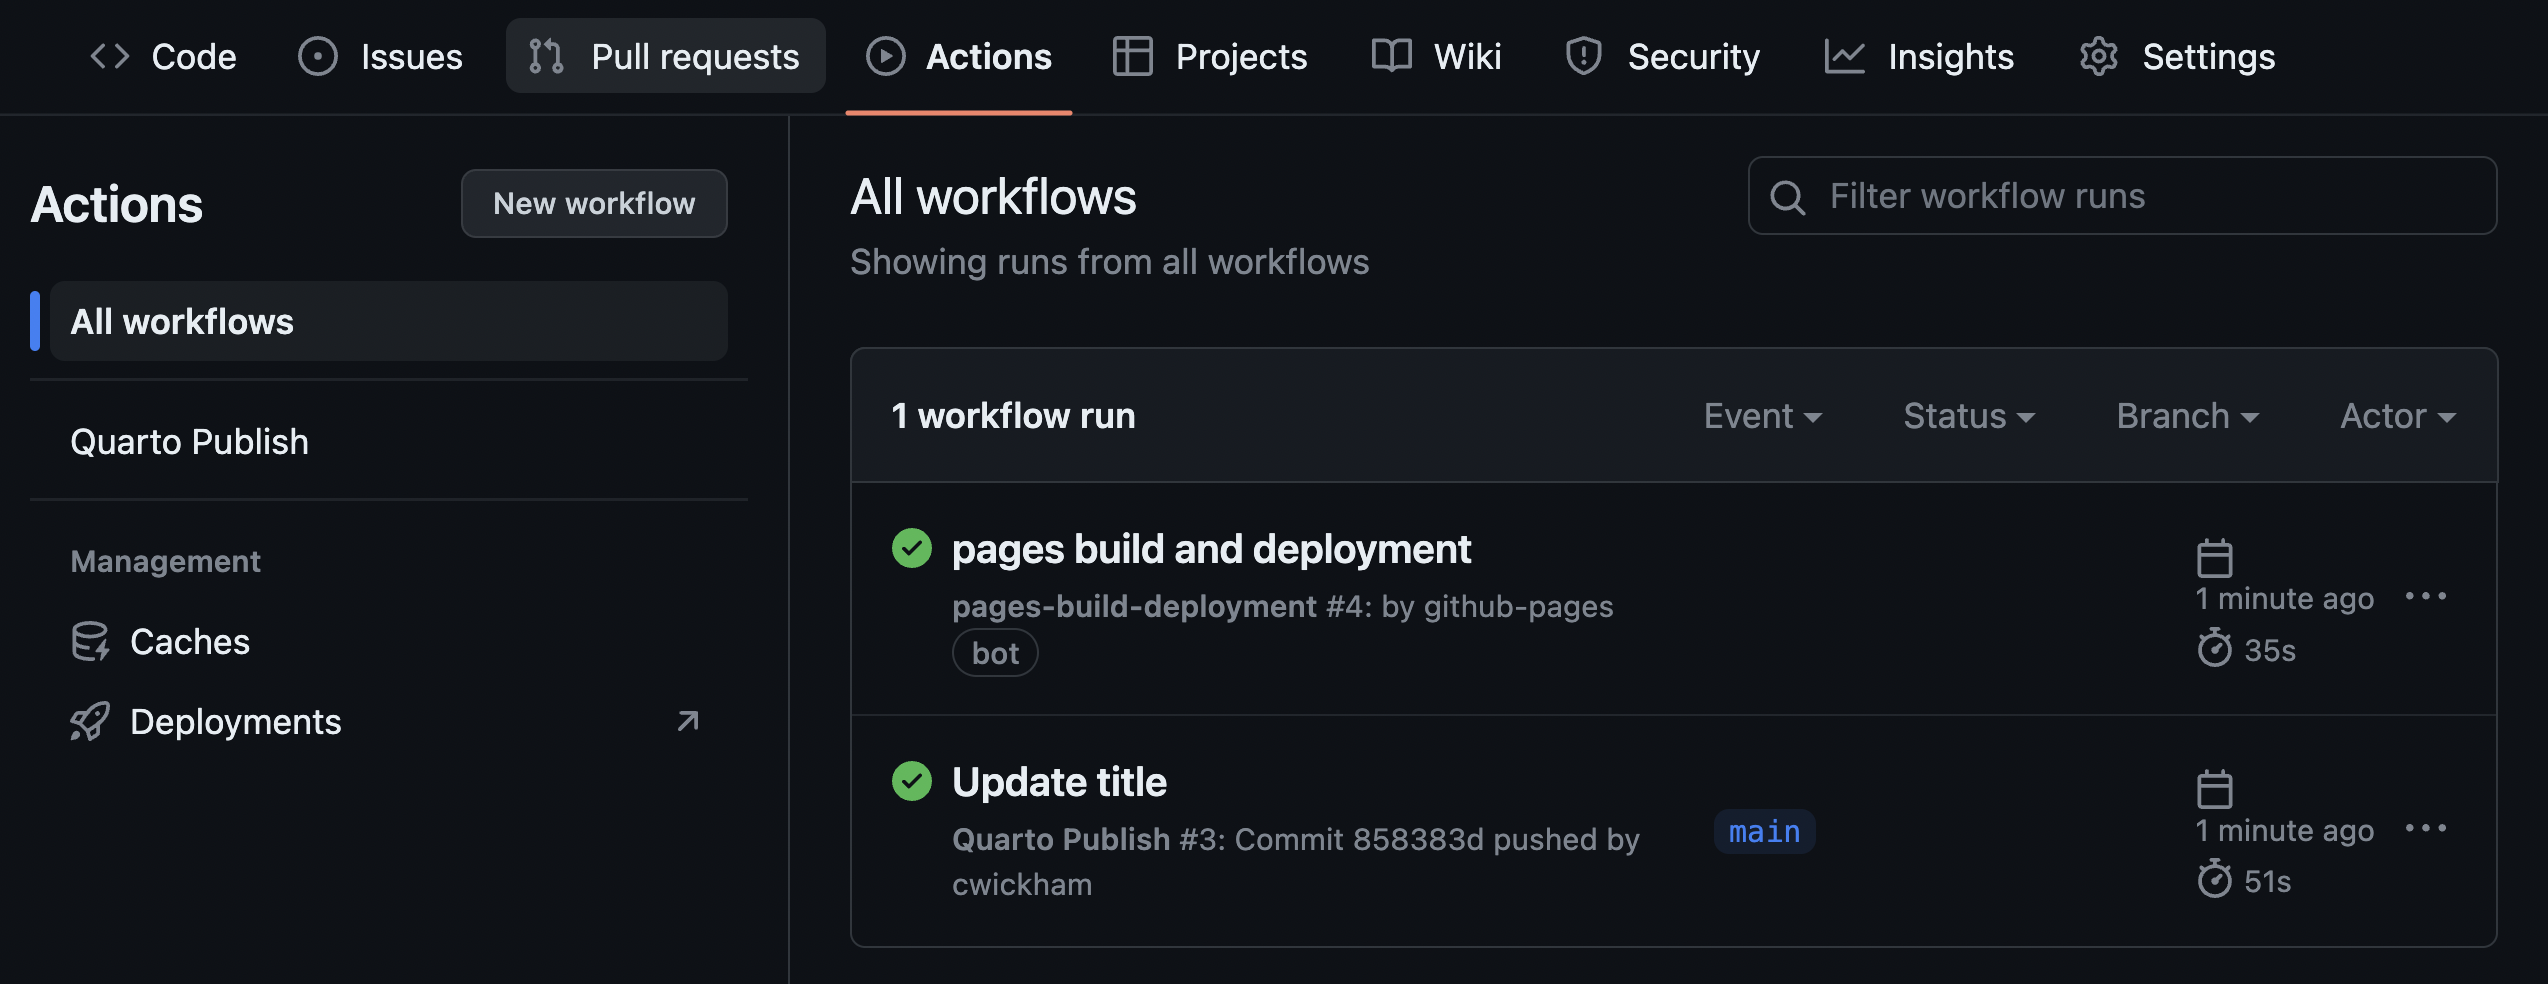 Screenshot of the Actions page on a template repo. Under Actions, two workflows are listed: Quarto Publish and pages-build-deployment. Under All Workflows the same workflows appear both showing a green checkmark.